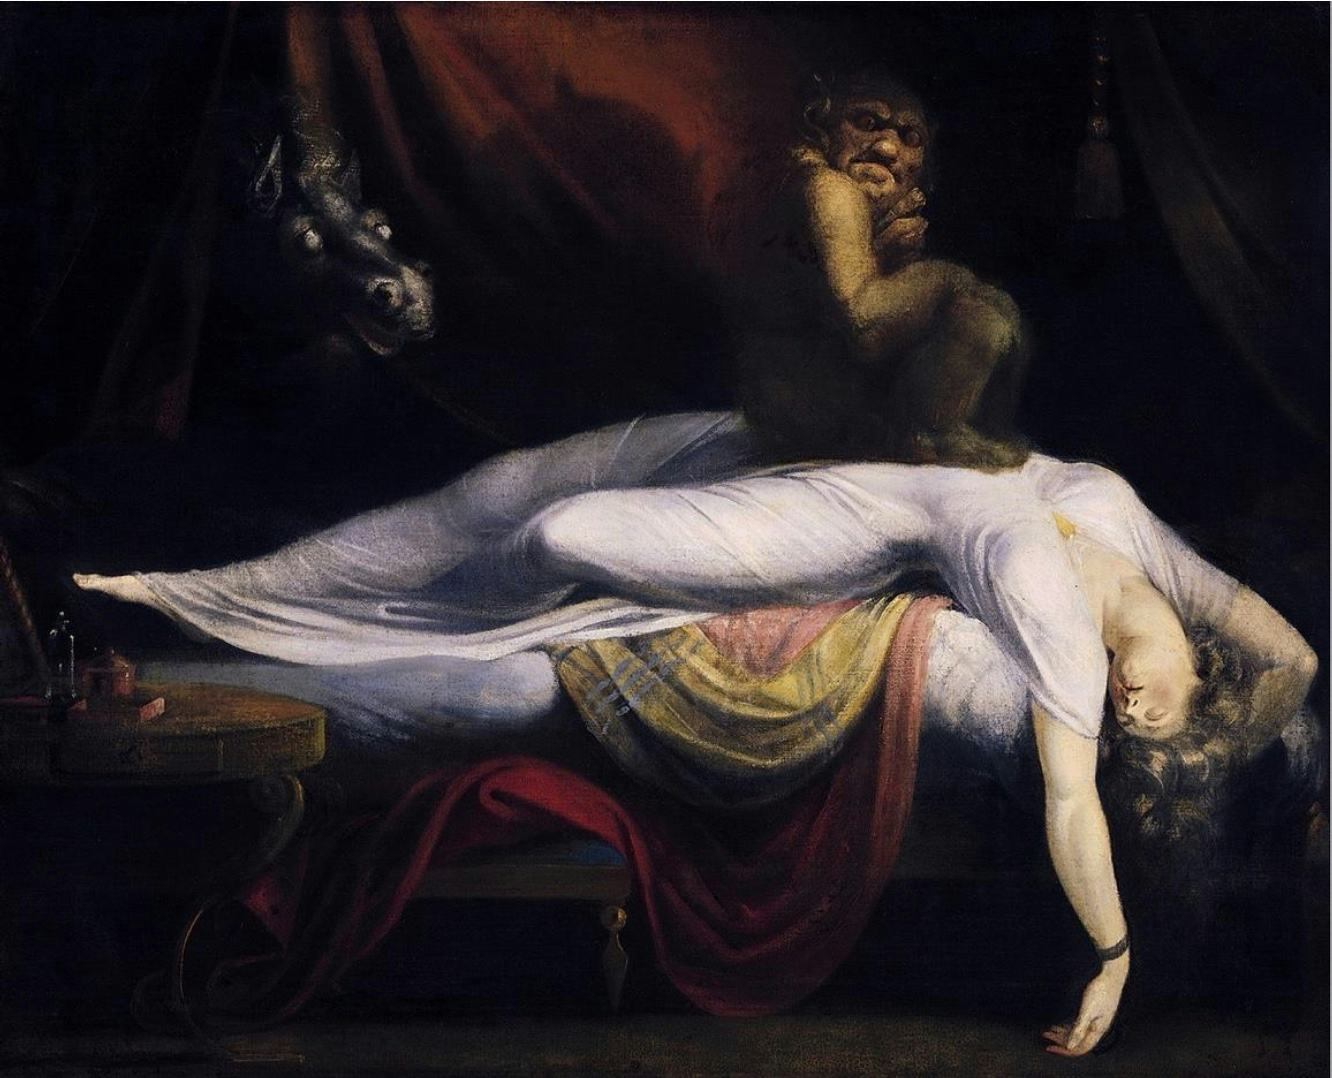 Painting by Henry Fuseli, The Nightmare, 1781